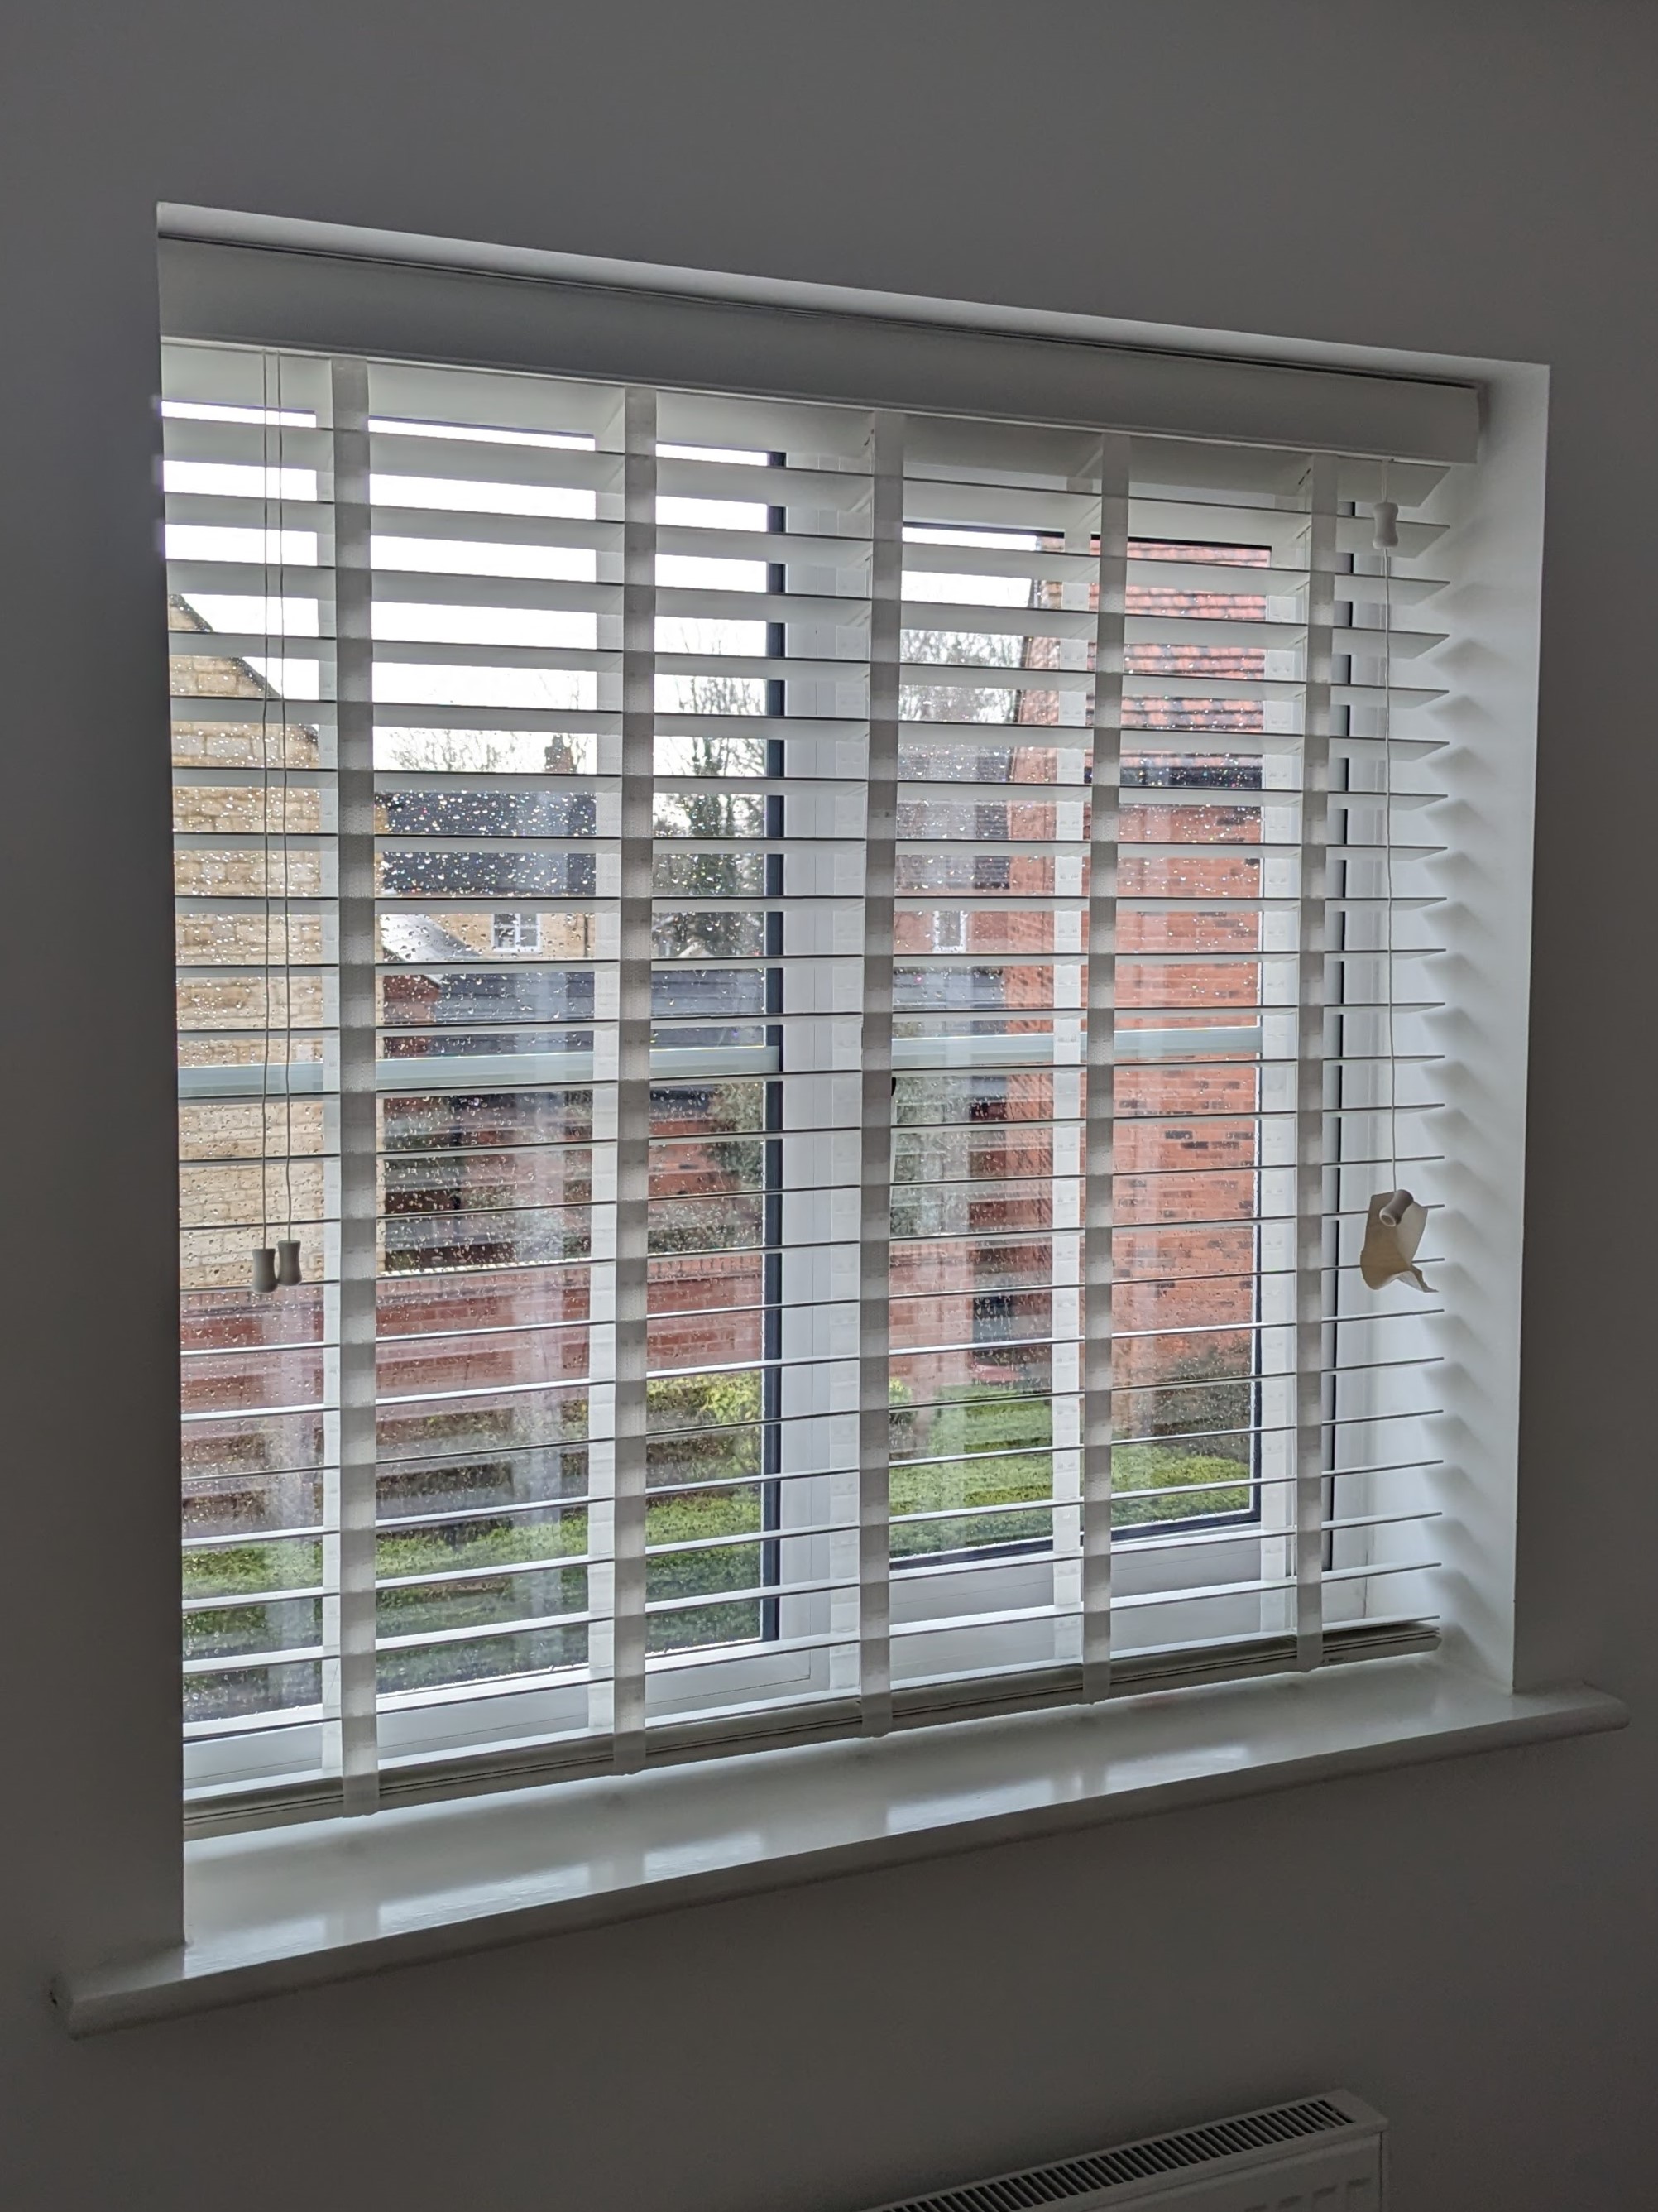 Venetian blinds fitted